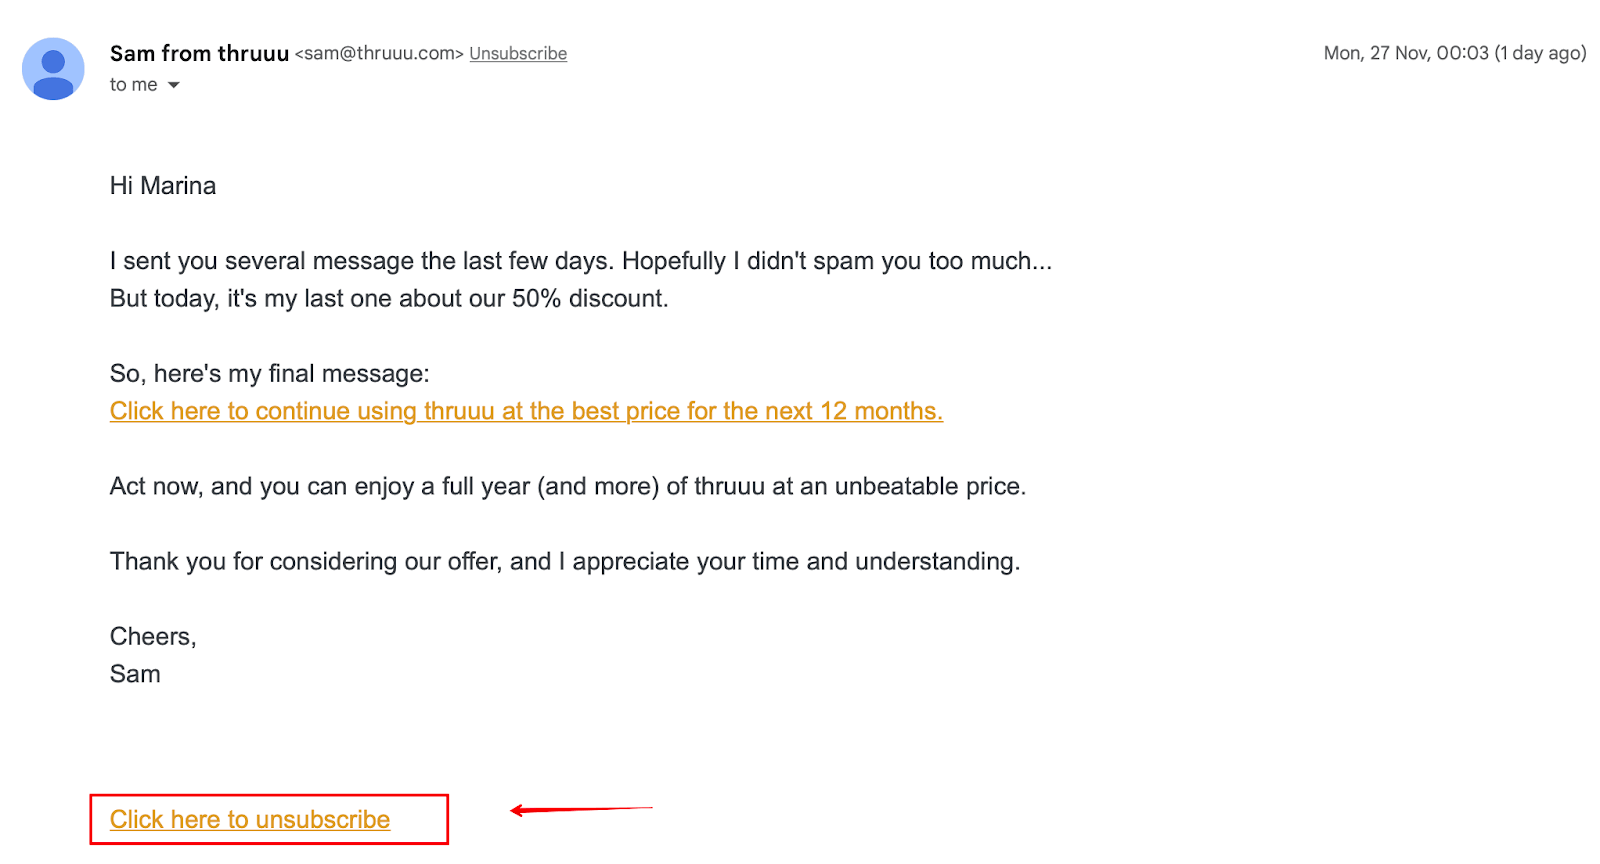 Opt-out or unsubscribe example